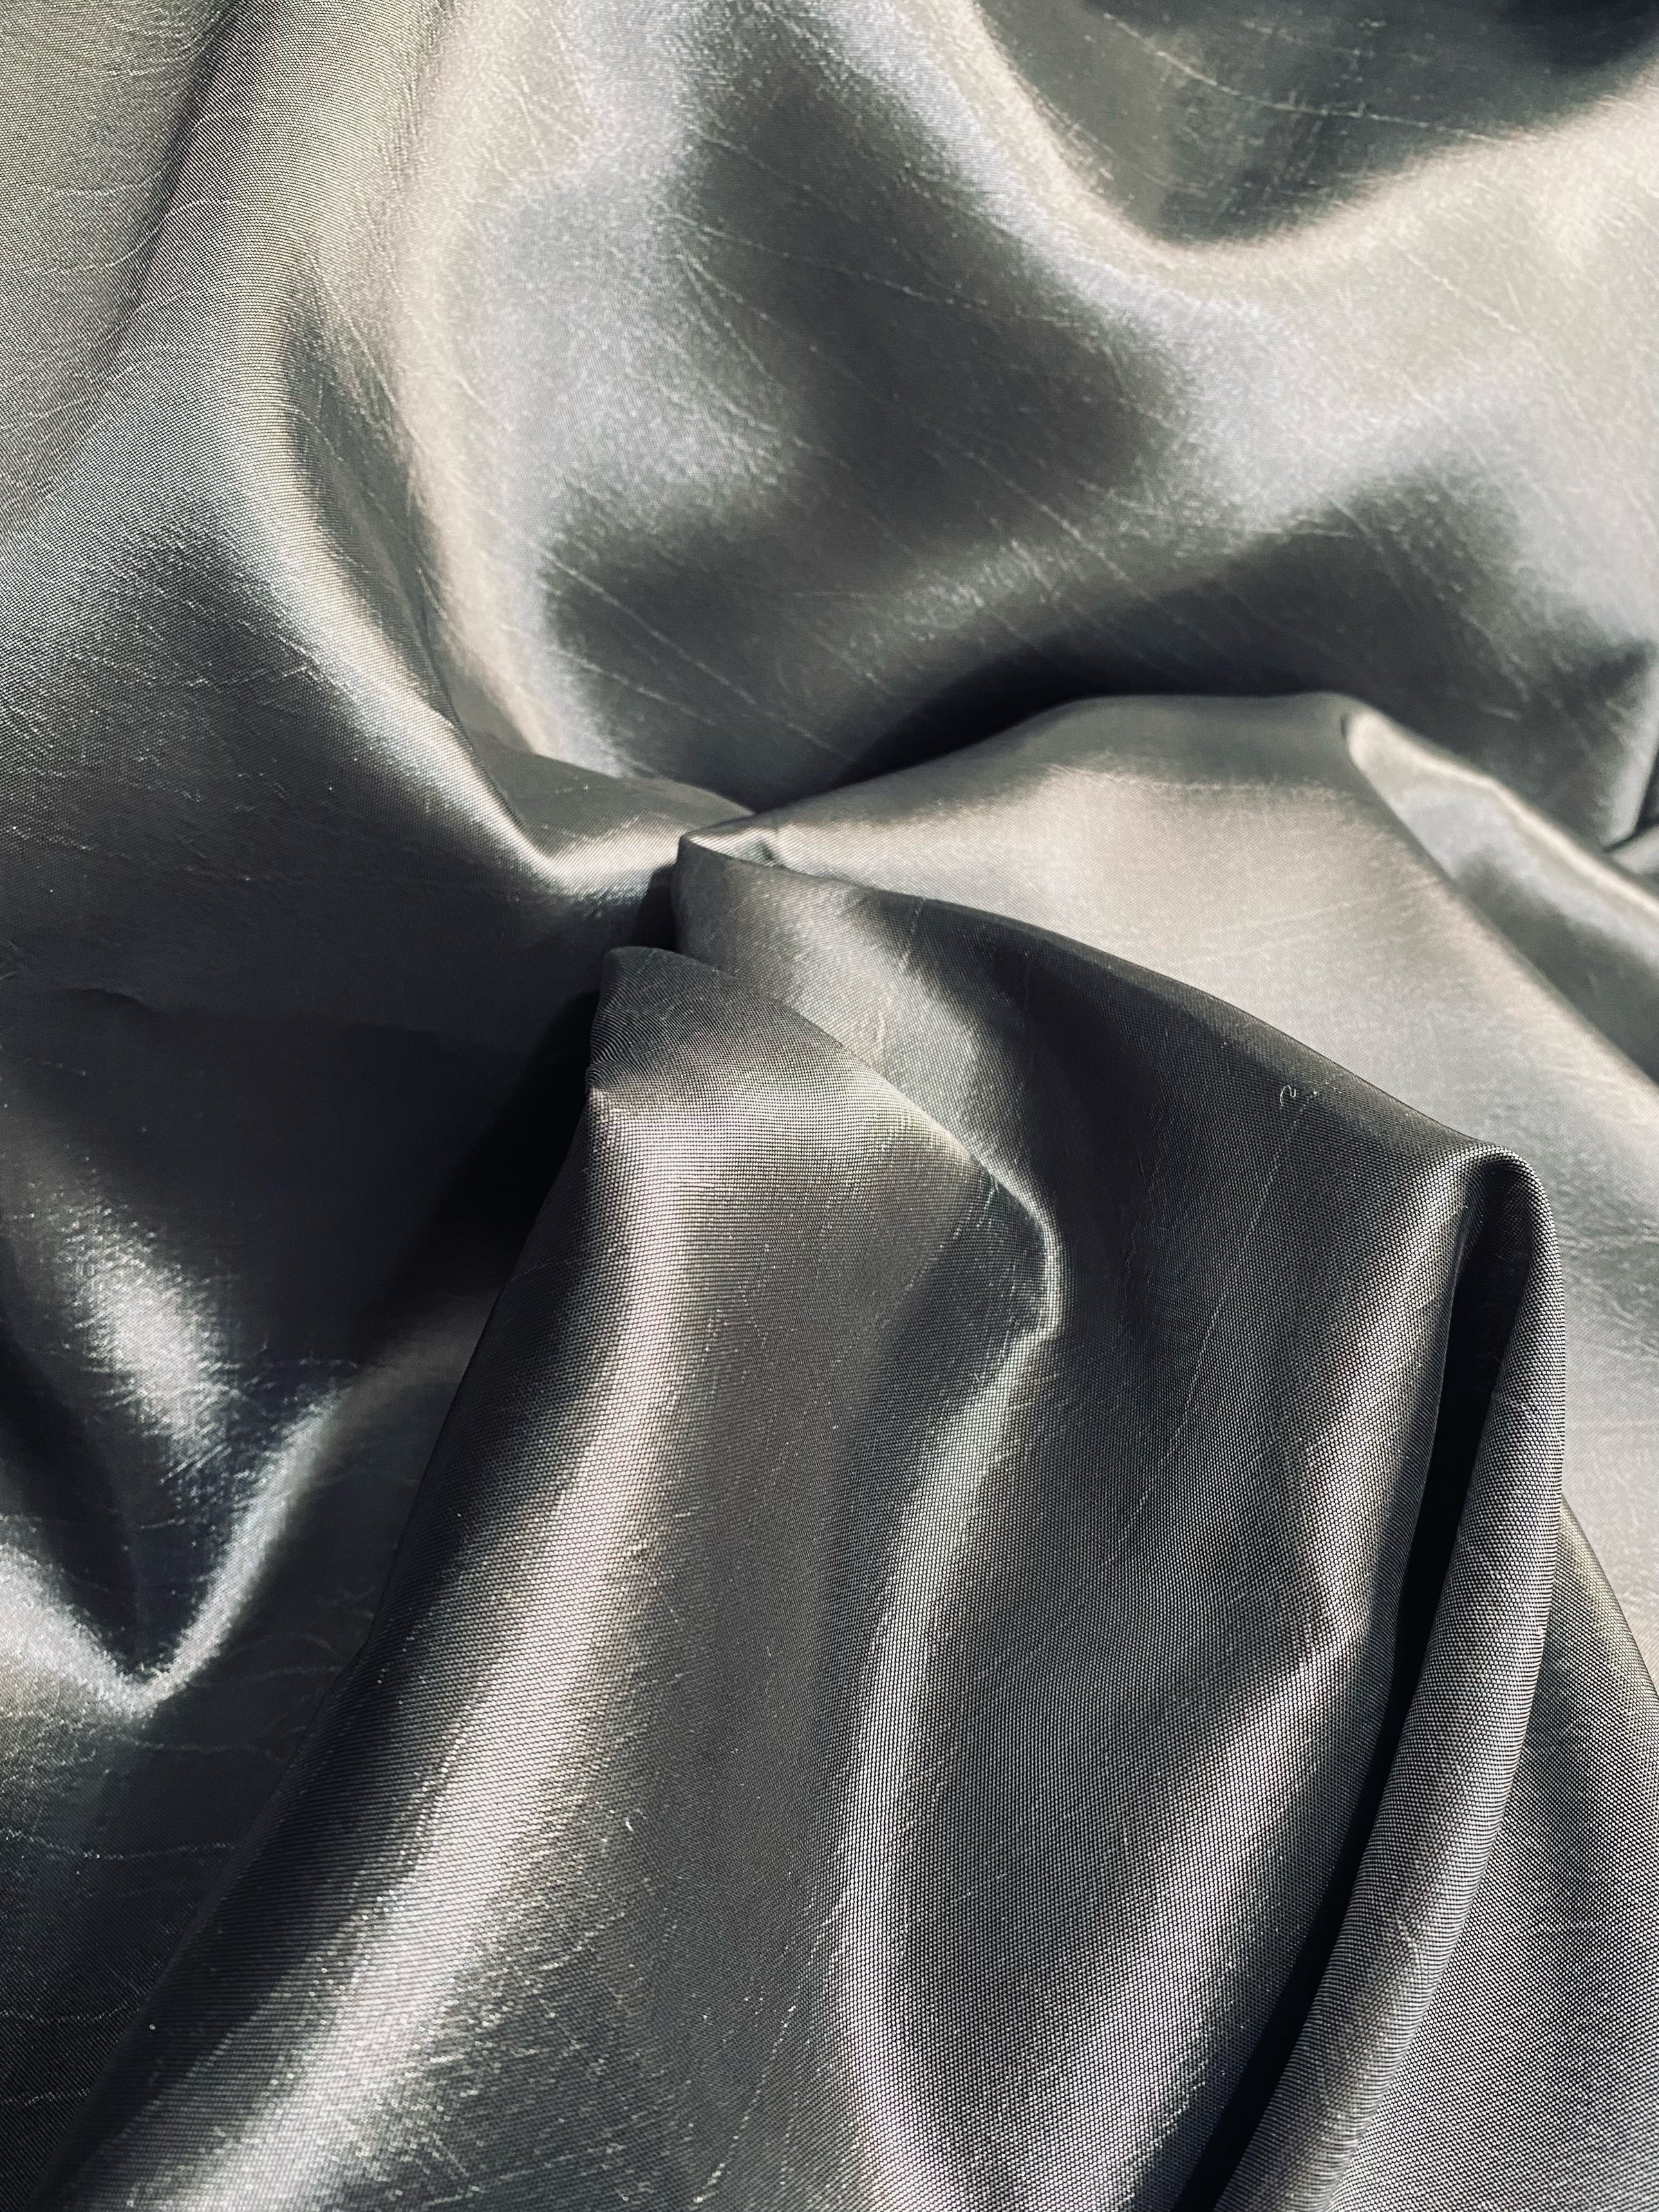 Trendy, Ultra Stylish, Gorgeous Silver Infused Fabric 